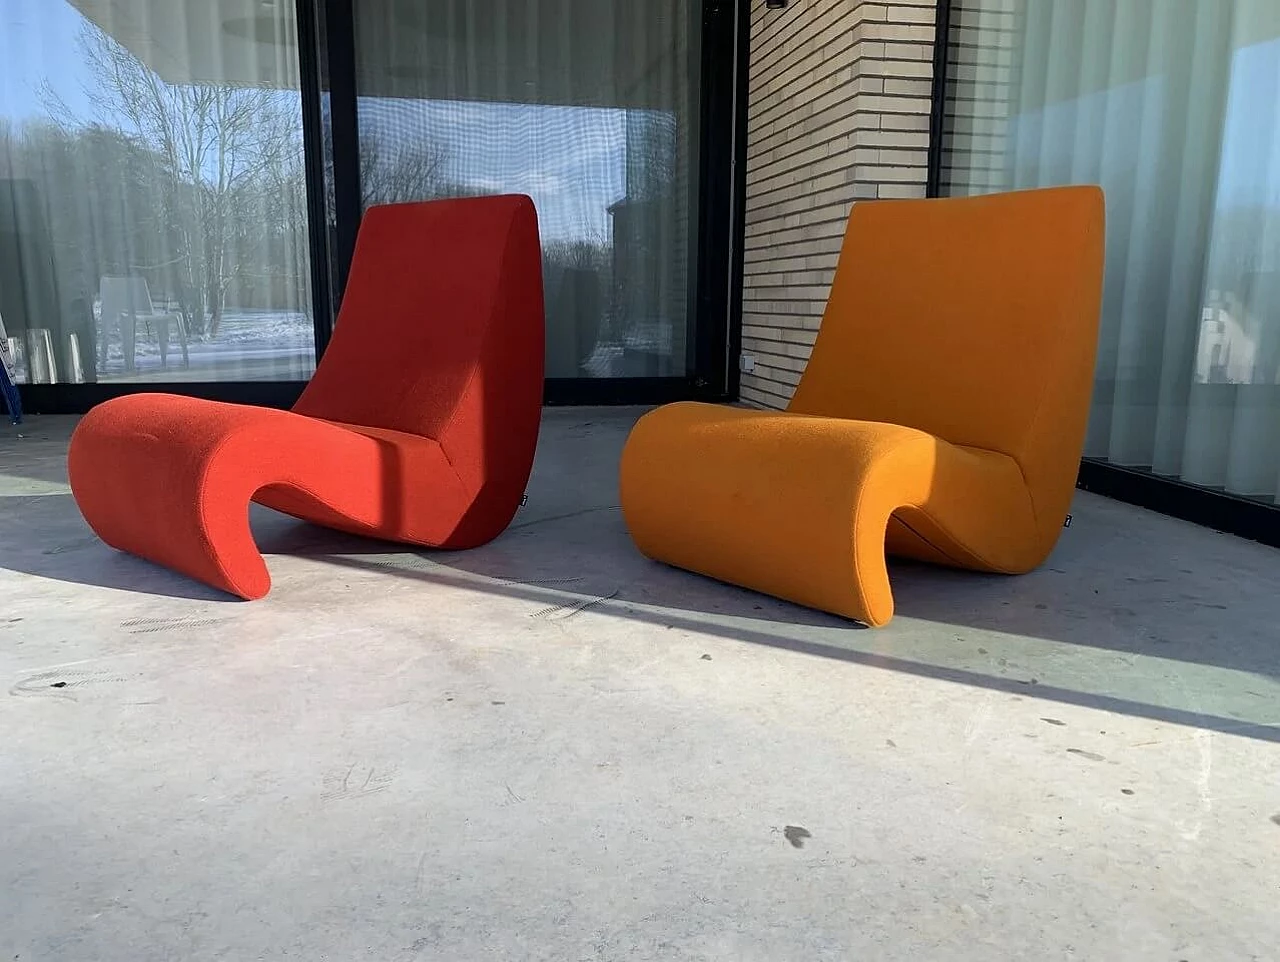 Pair of Amoebe armchairs by Verner Panton for Vitra 1